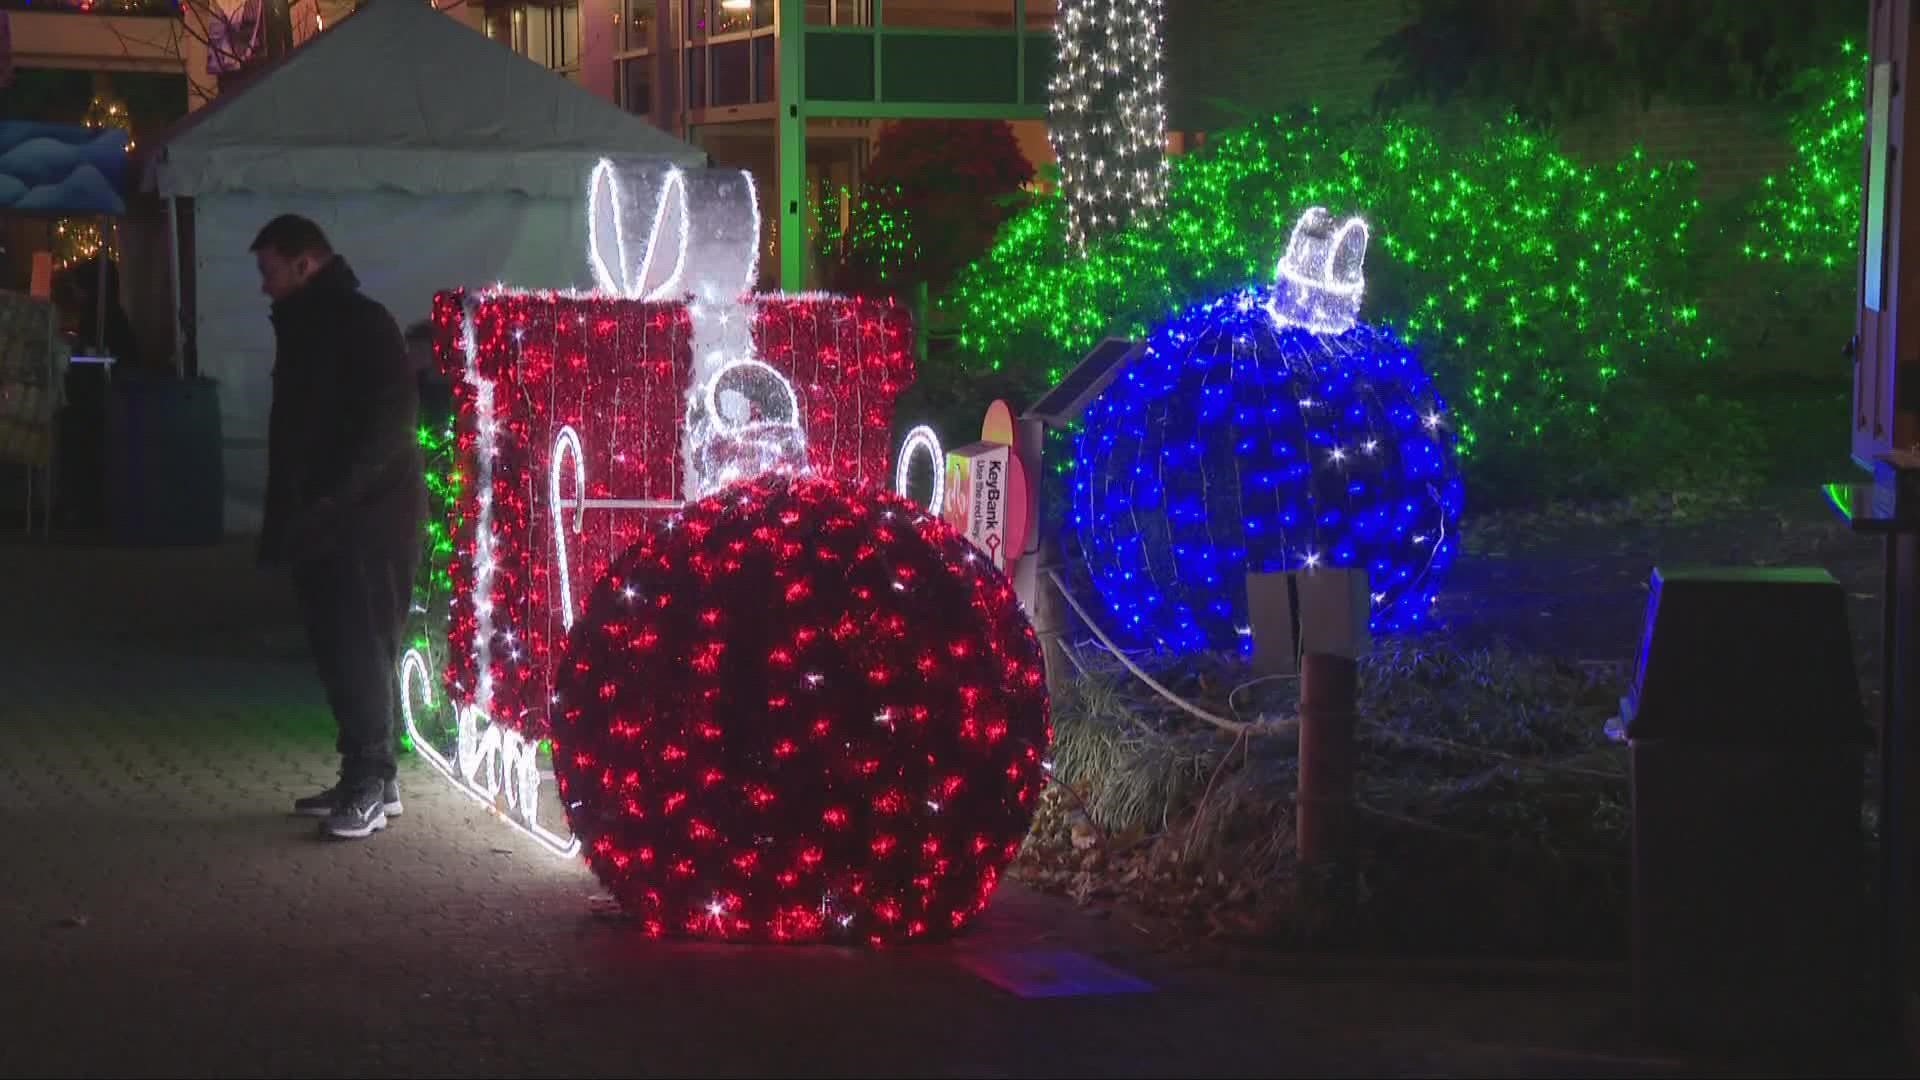 It's back! The Cleveland Metroparks Zoo has announced that its Wild Winter Lights event is returning for the 2022 Christmas season starting on November 15.